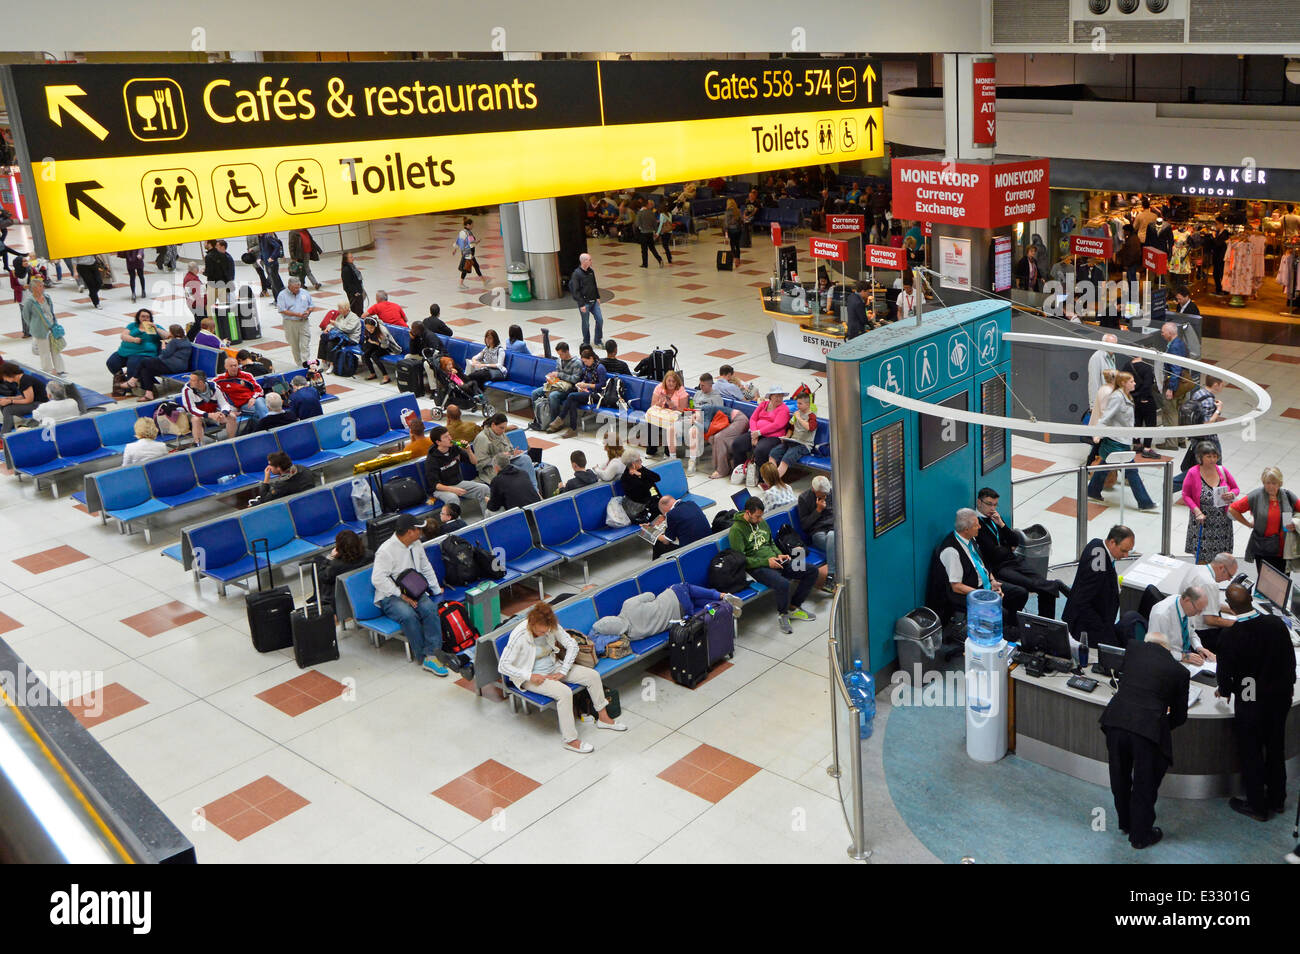 Seating area below cafes restaurants and toilet signs at Gatwick Airport North Terminal departure lounge and shopping concourse Stock Photo